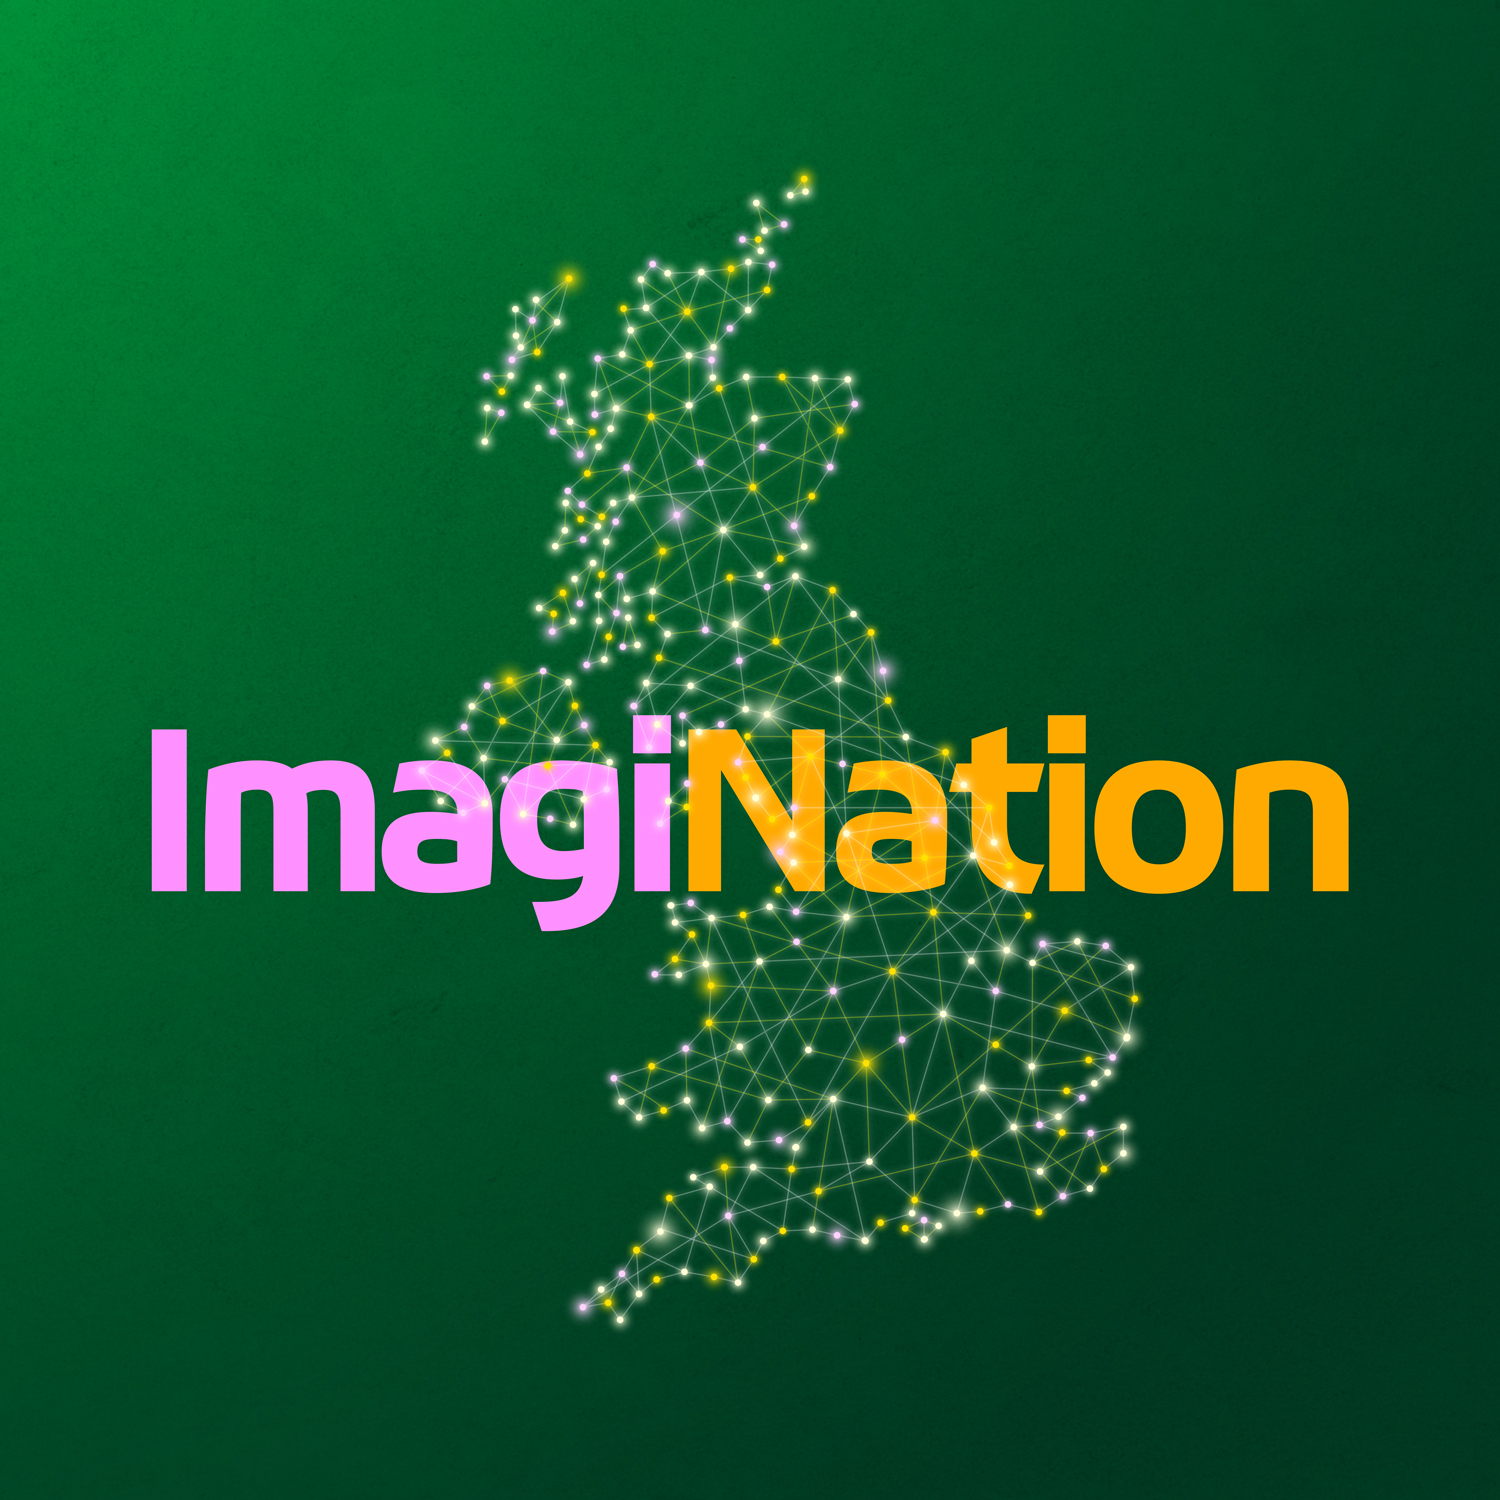 Submit your ImagiNation film by 20 July